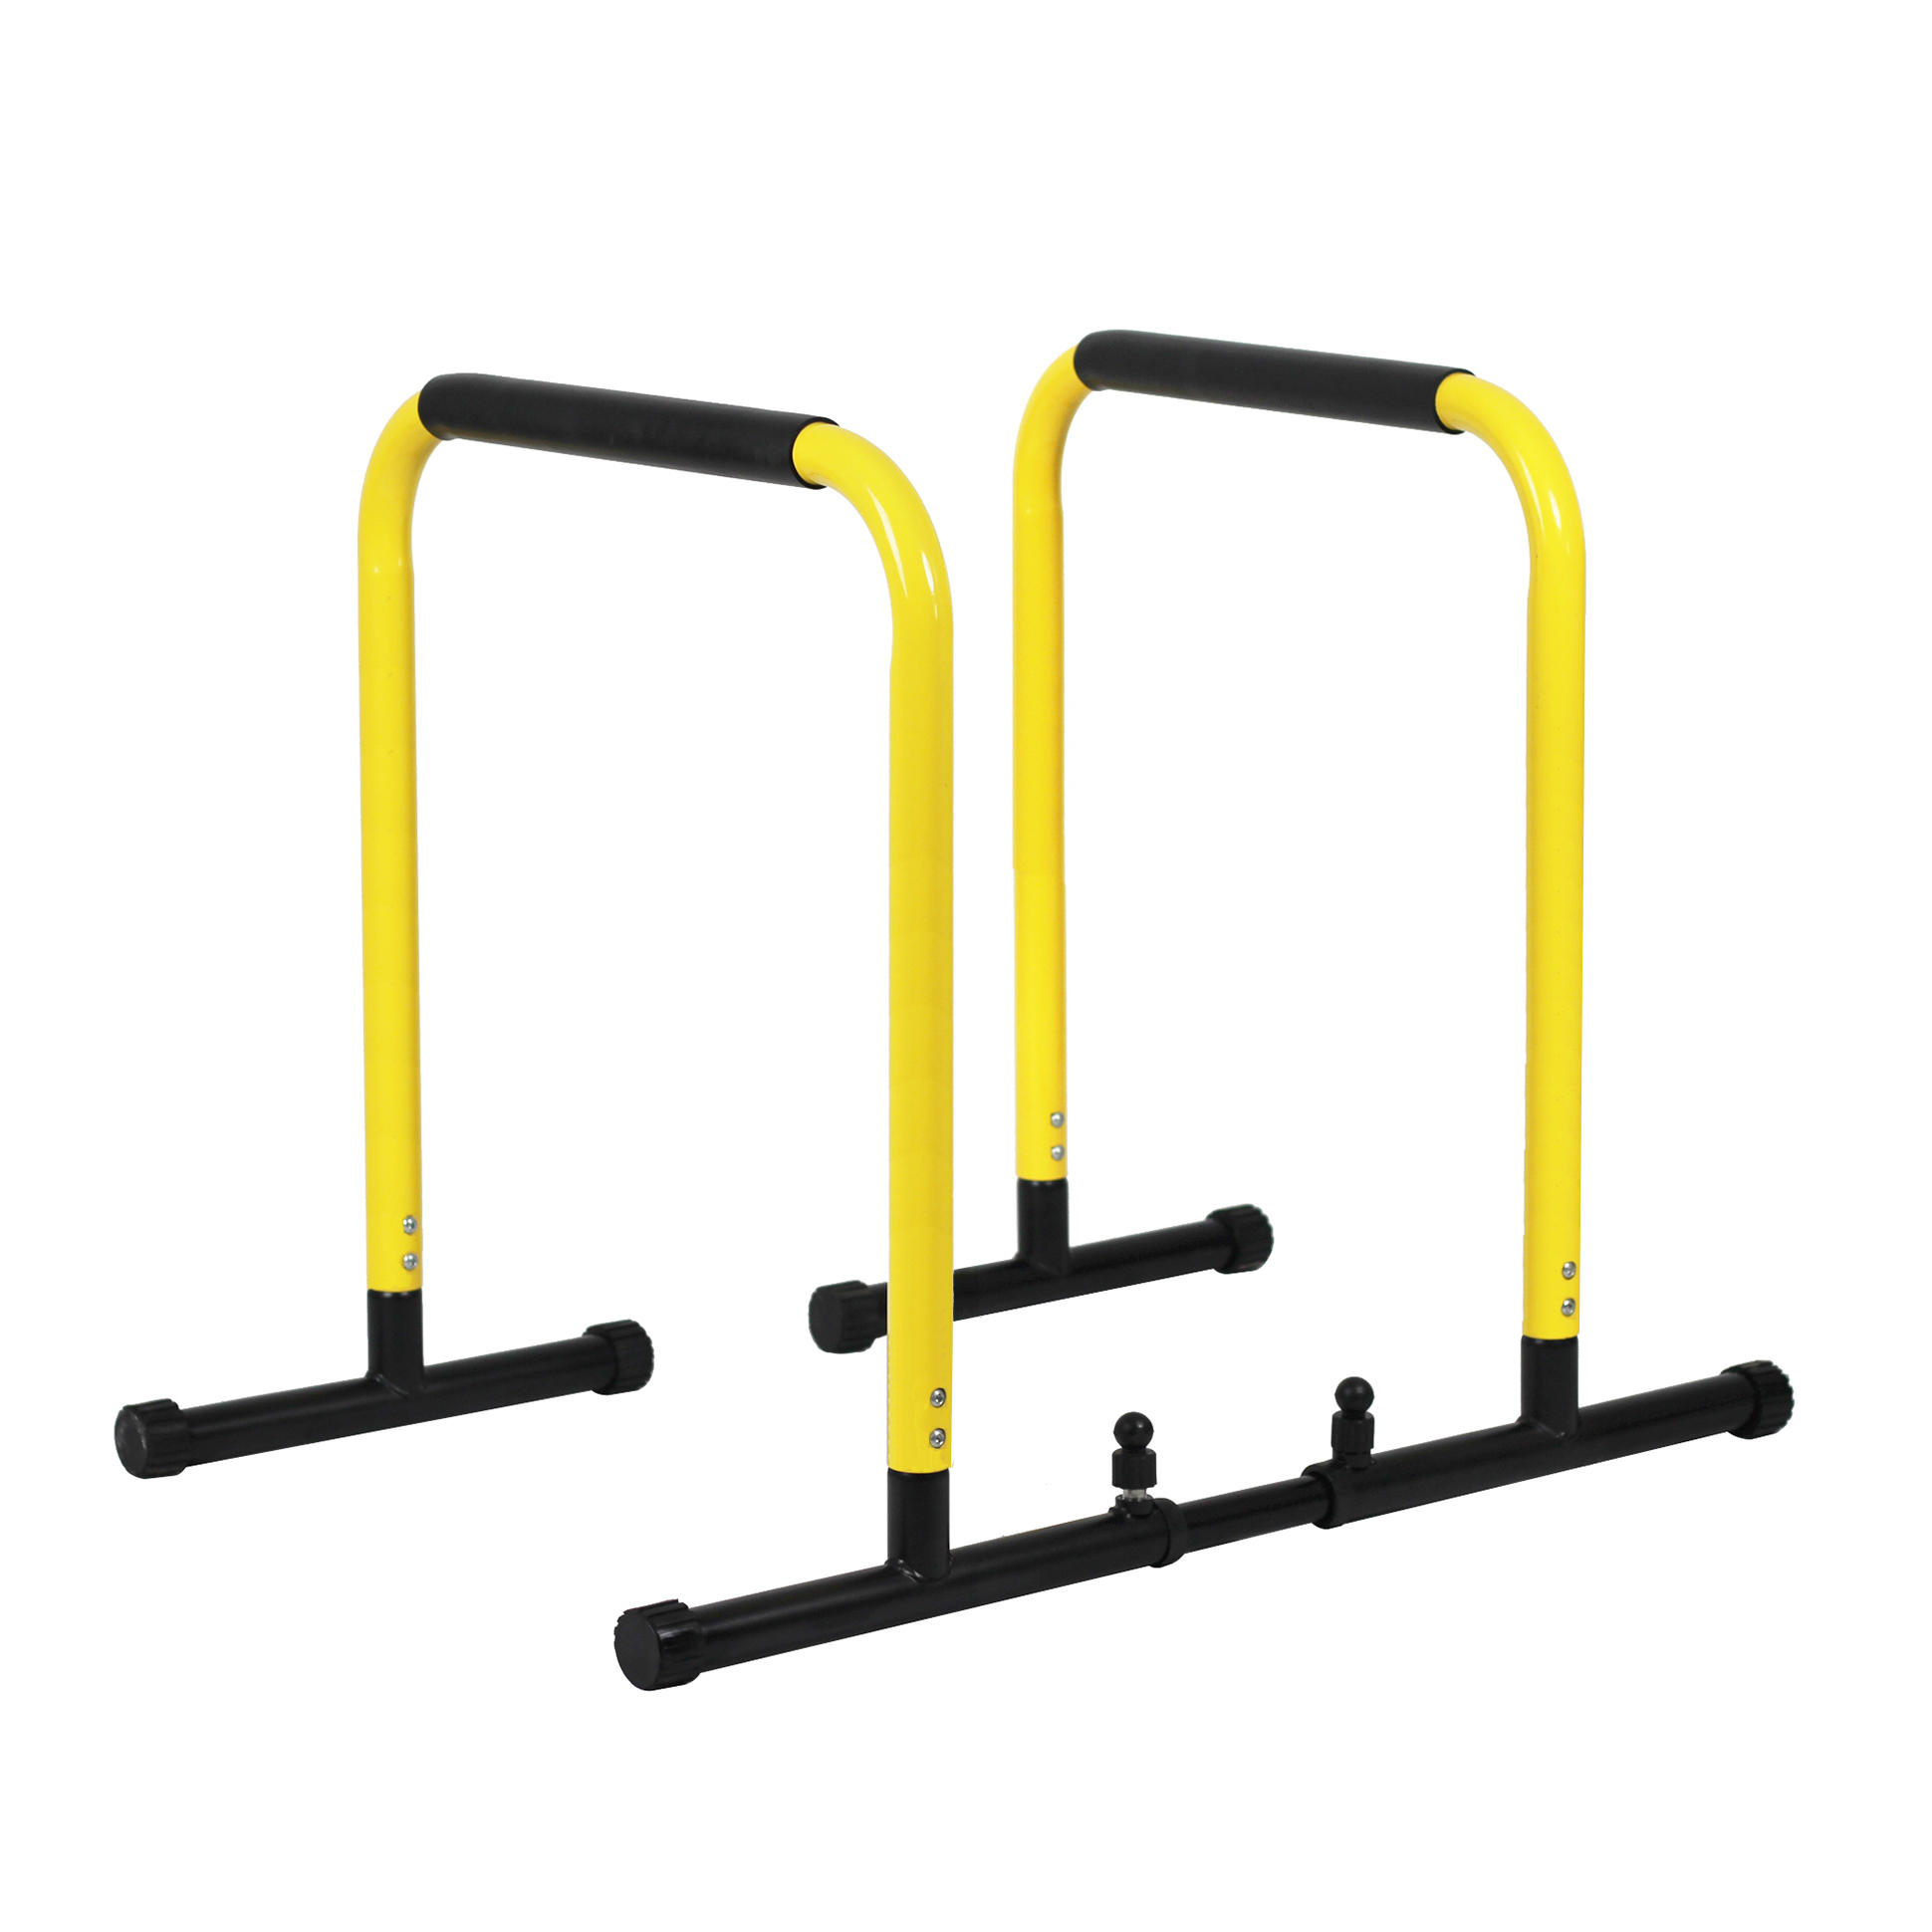  HY-E9021 Indoor Multi-function parallel bars